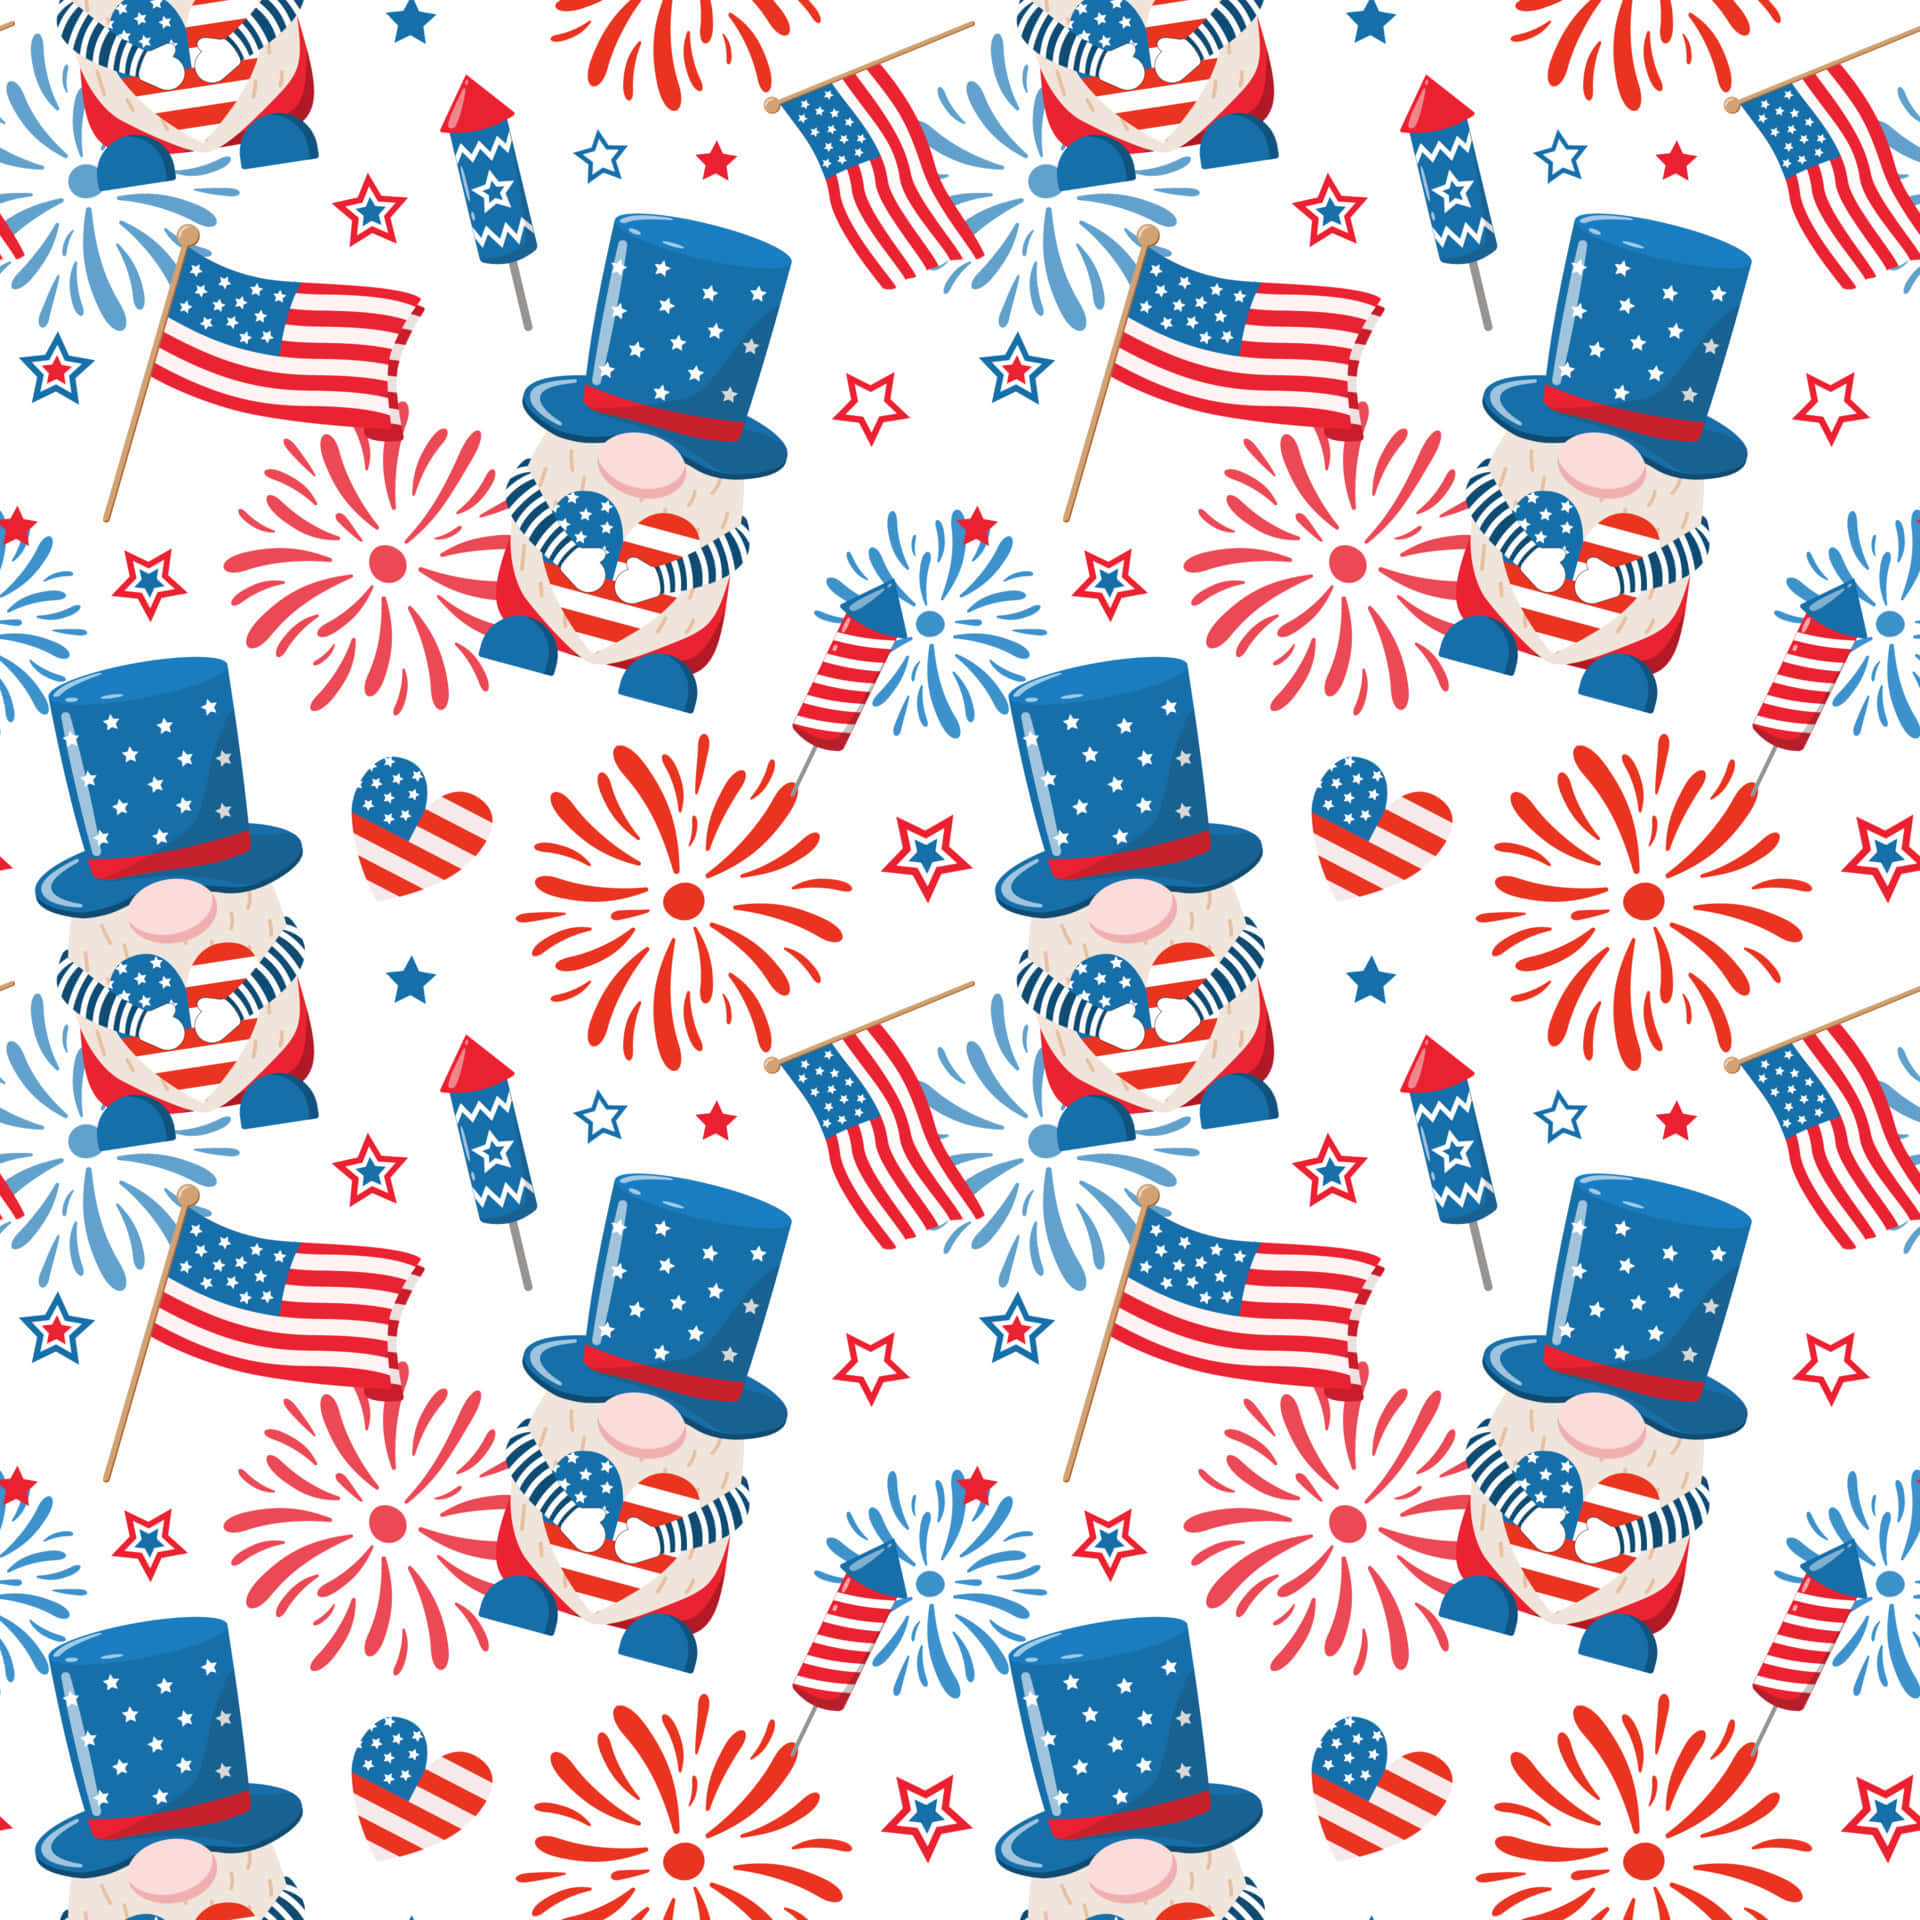 Celebrate the 4th of July in Stylish and Cute Fashion!